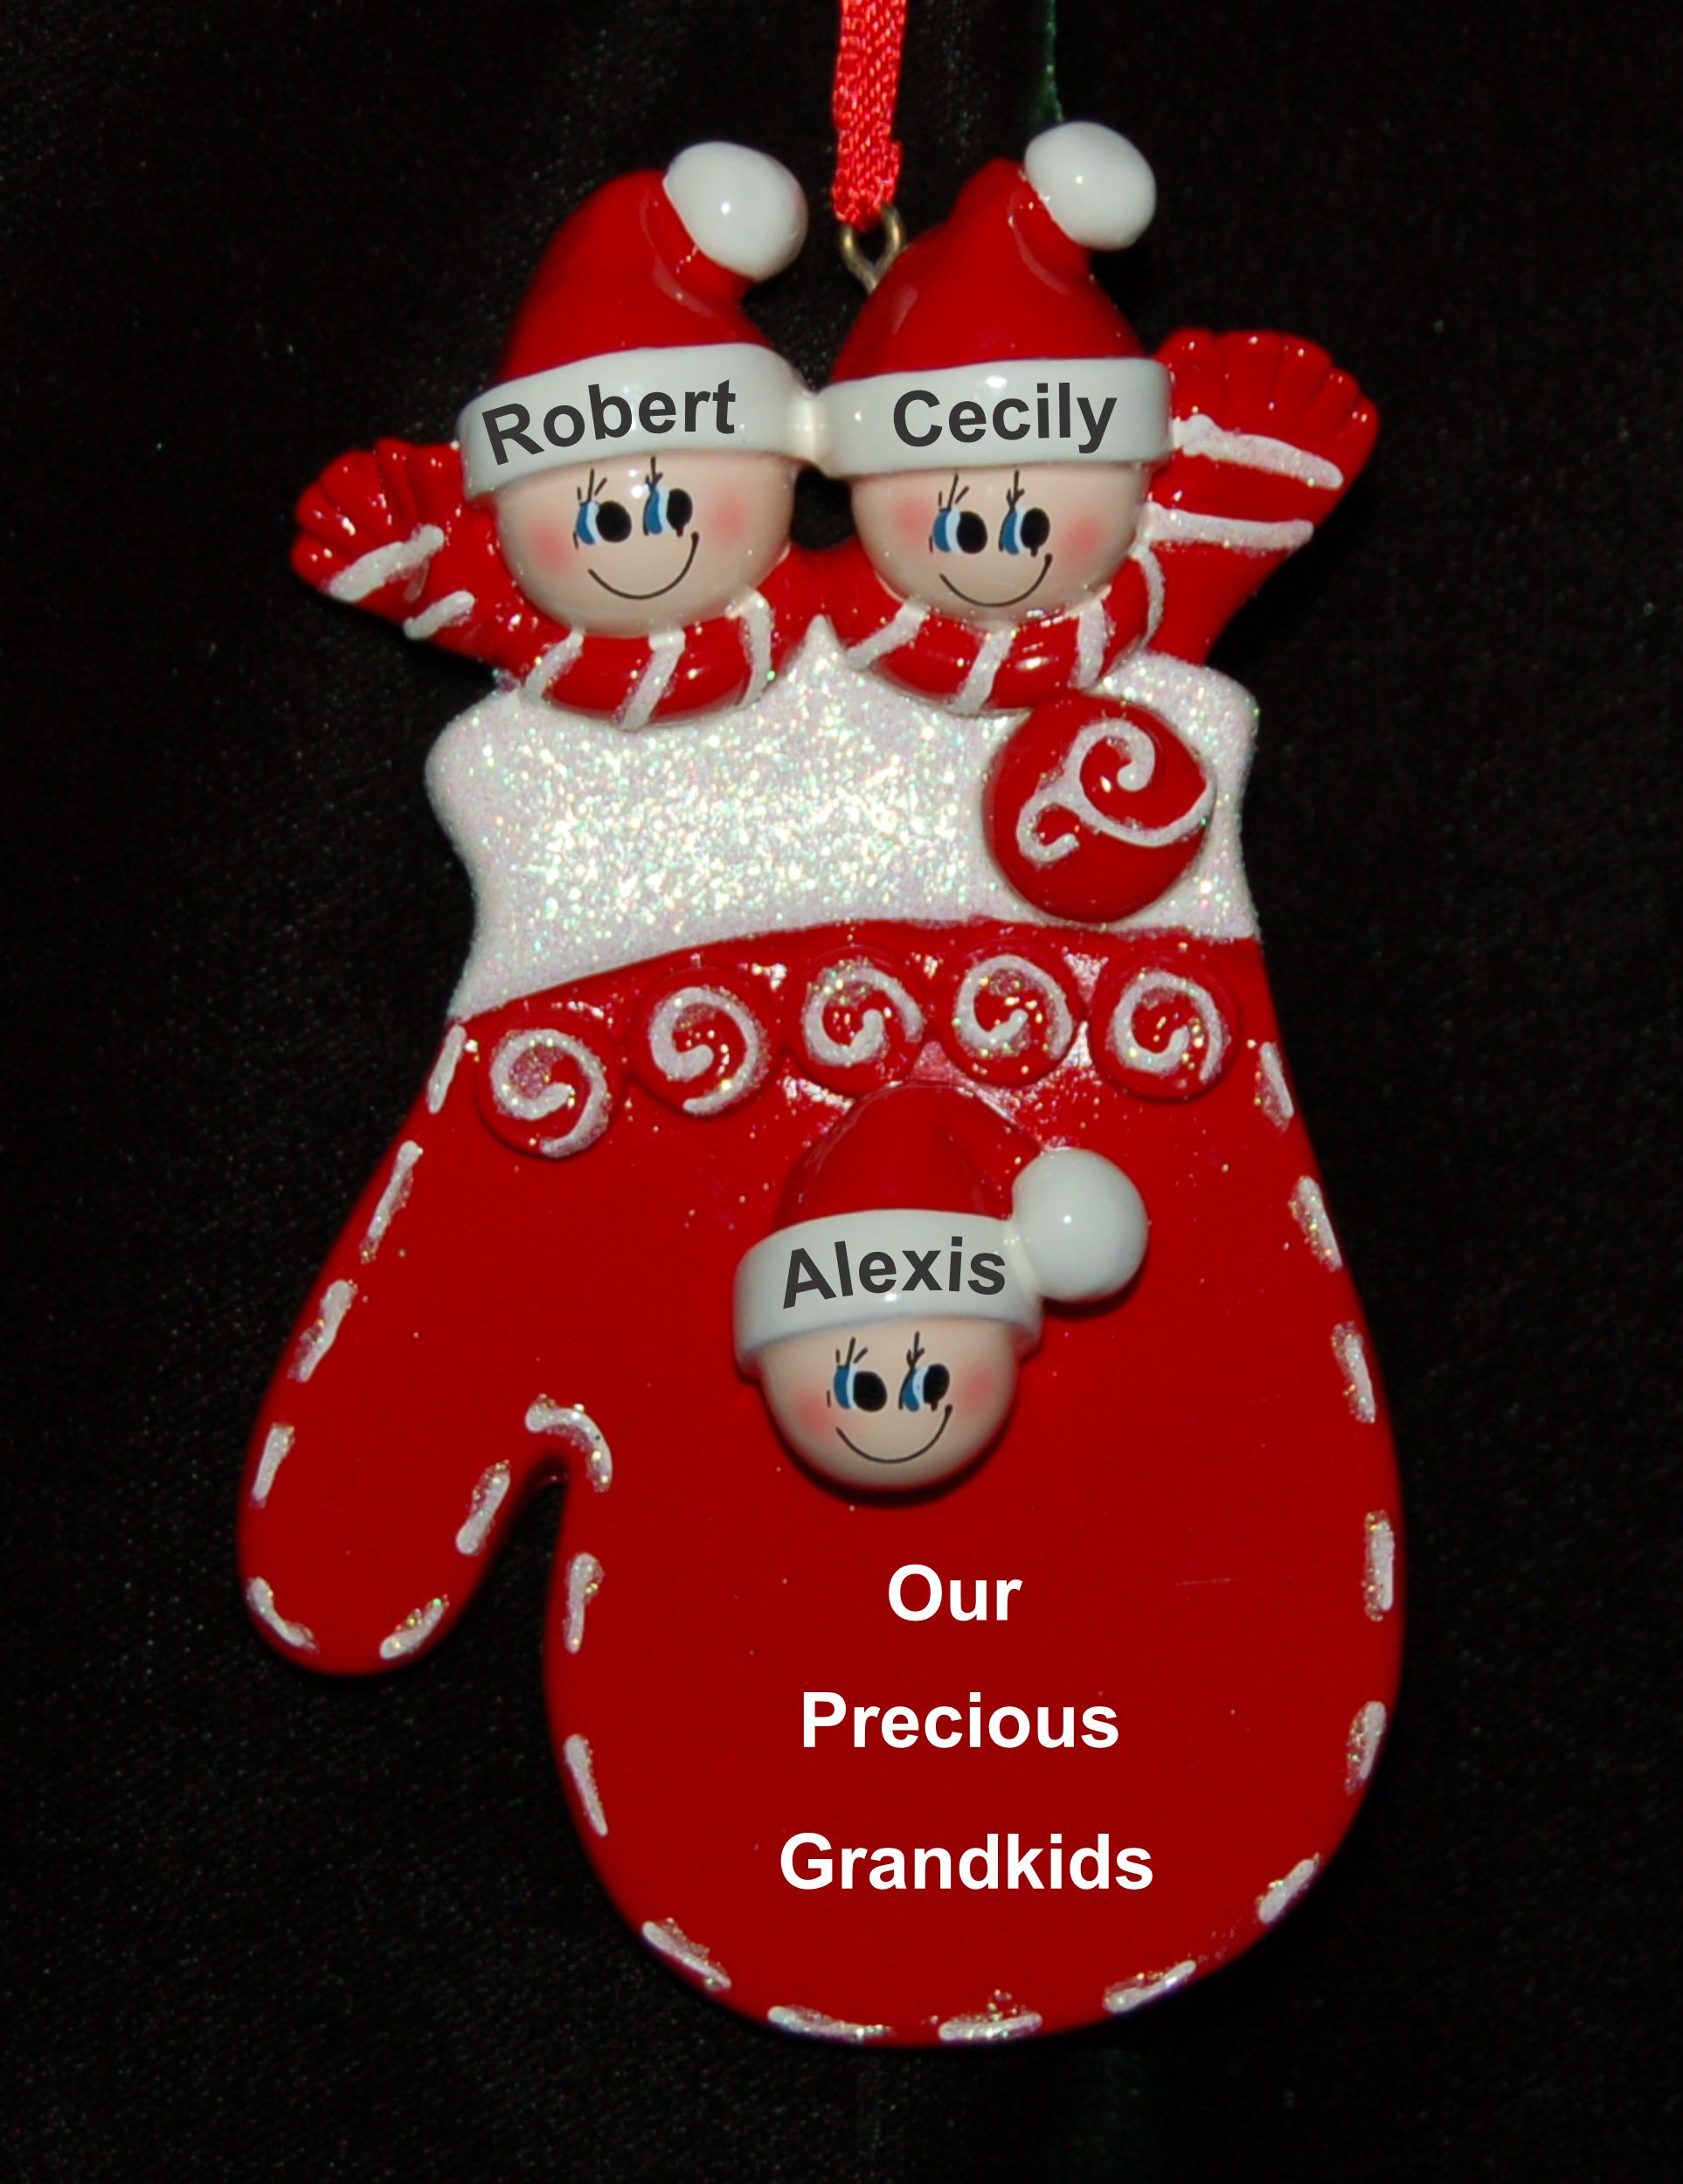 Grandparents Christmas Ornament Holiday Mitten 3 Grandkids Personalized by RussellRhodes.com